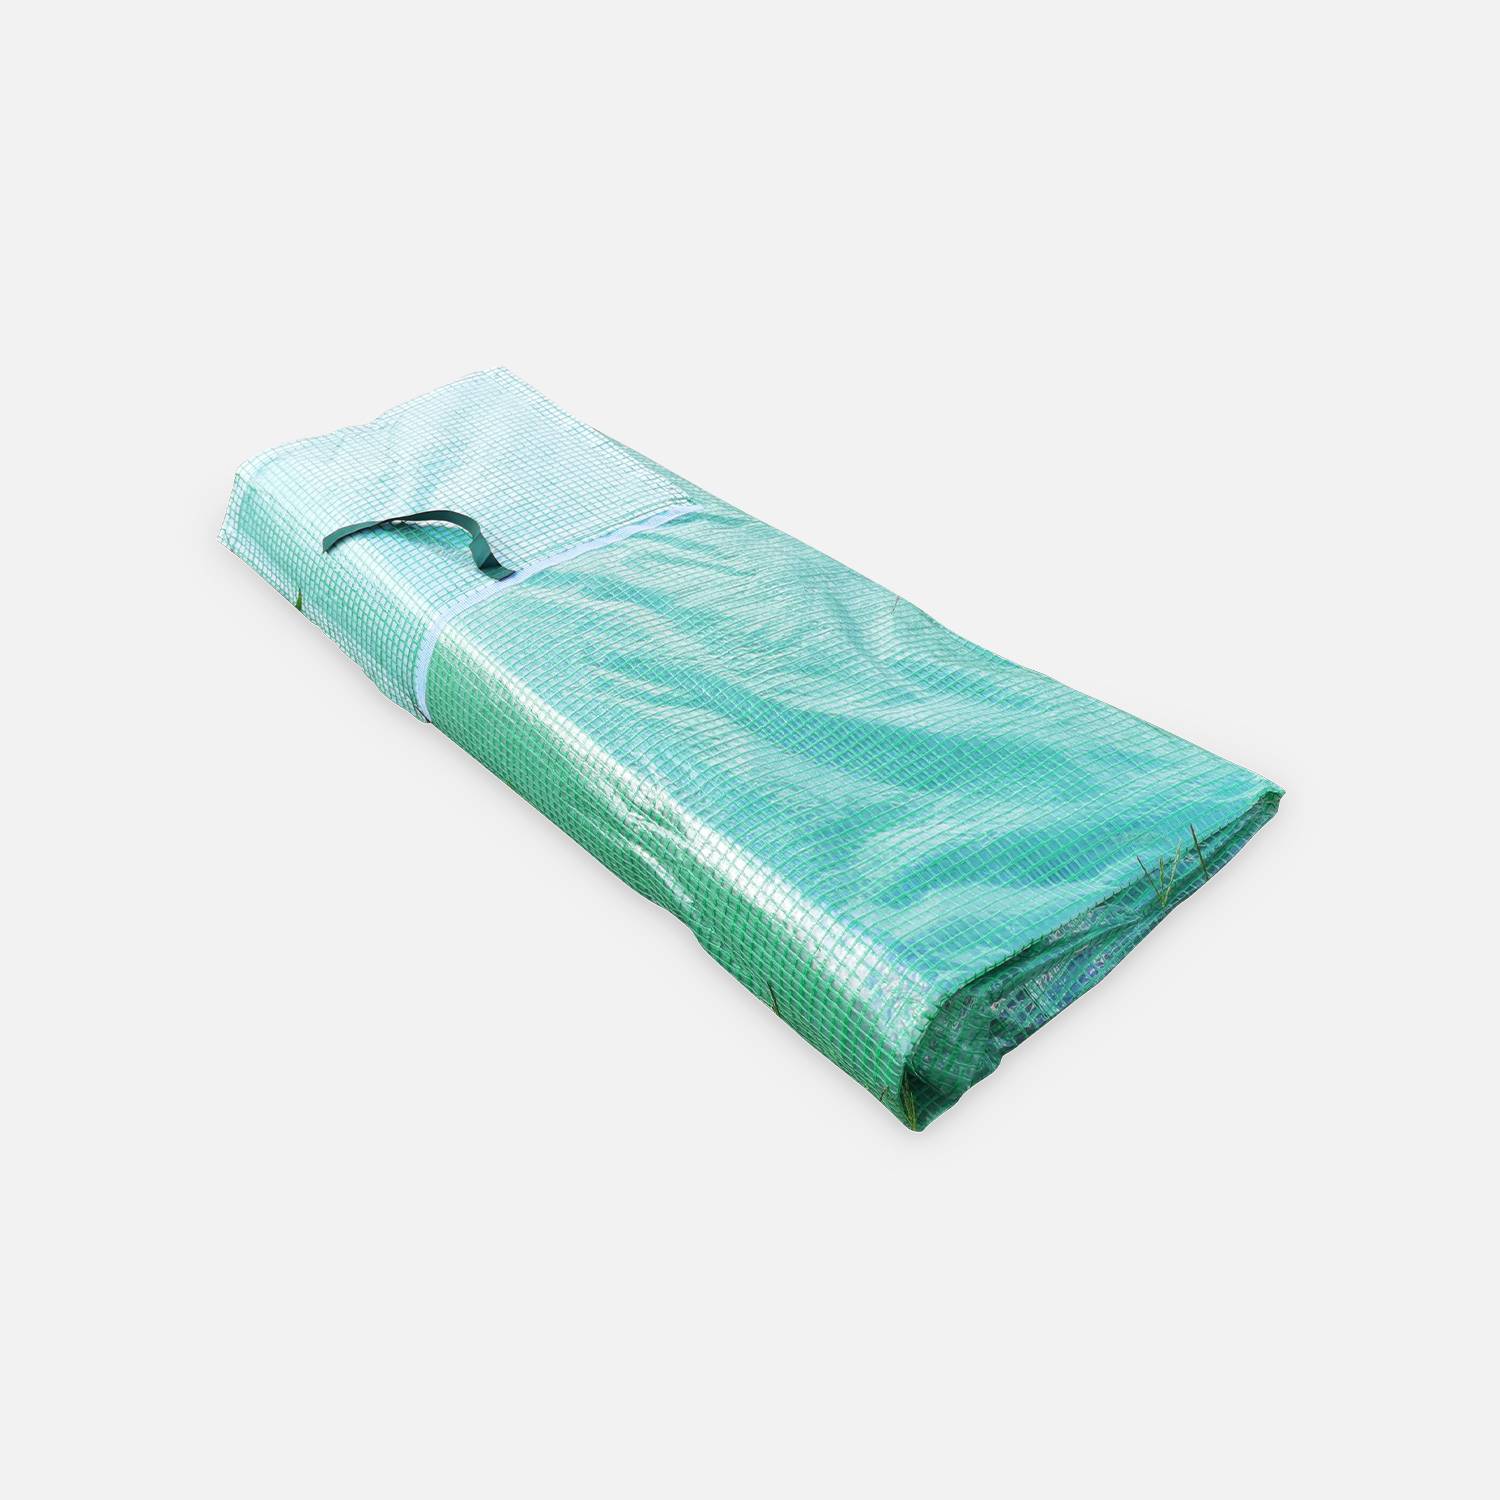 Replacement greenhouse cover - 18 sq metres - Romarin - Green  Photo1